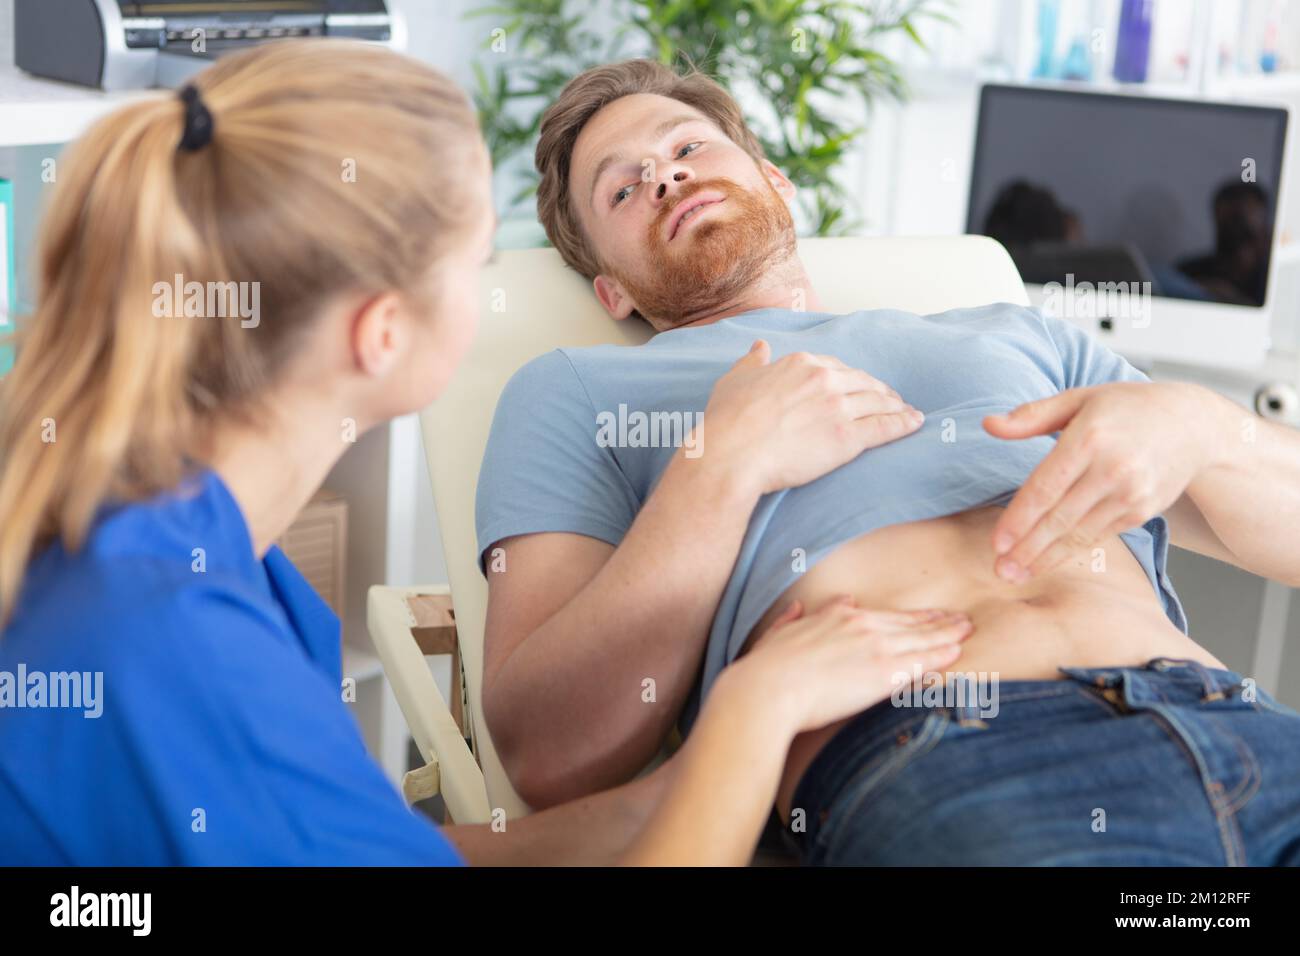 doctor examining male patient with stomach pains Stock Photo